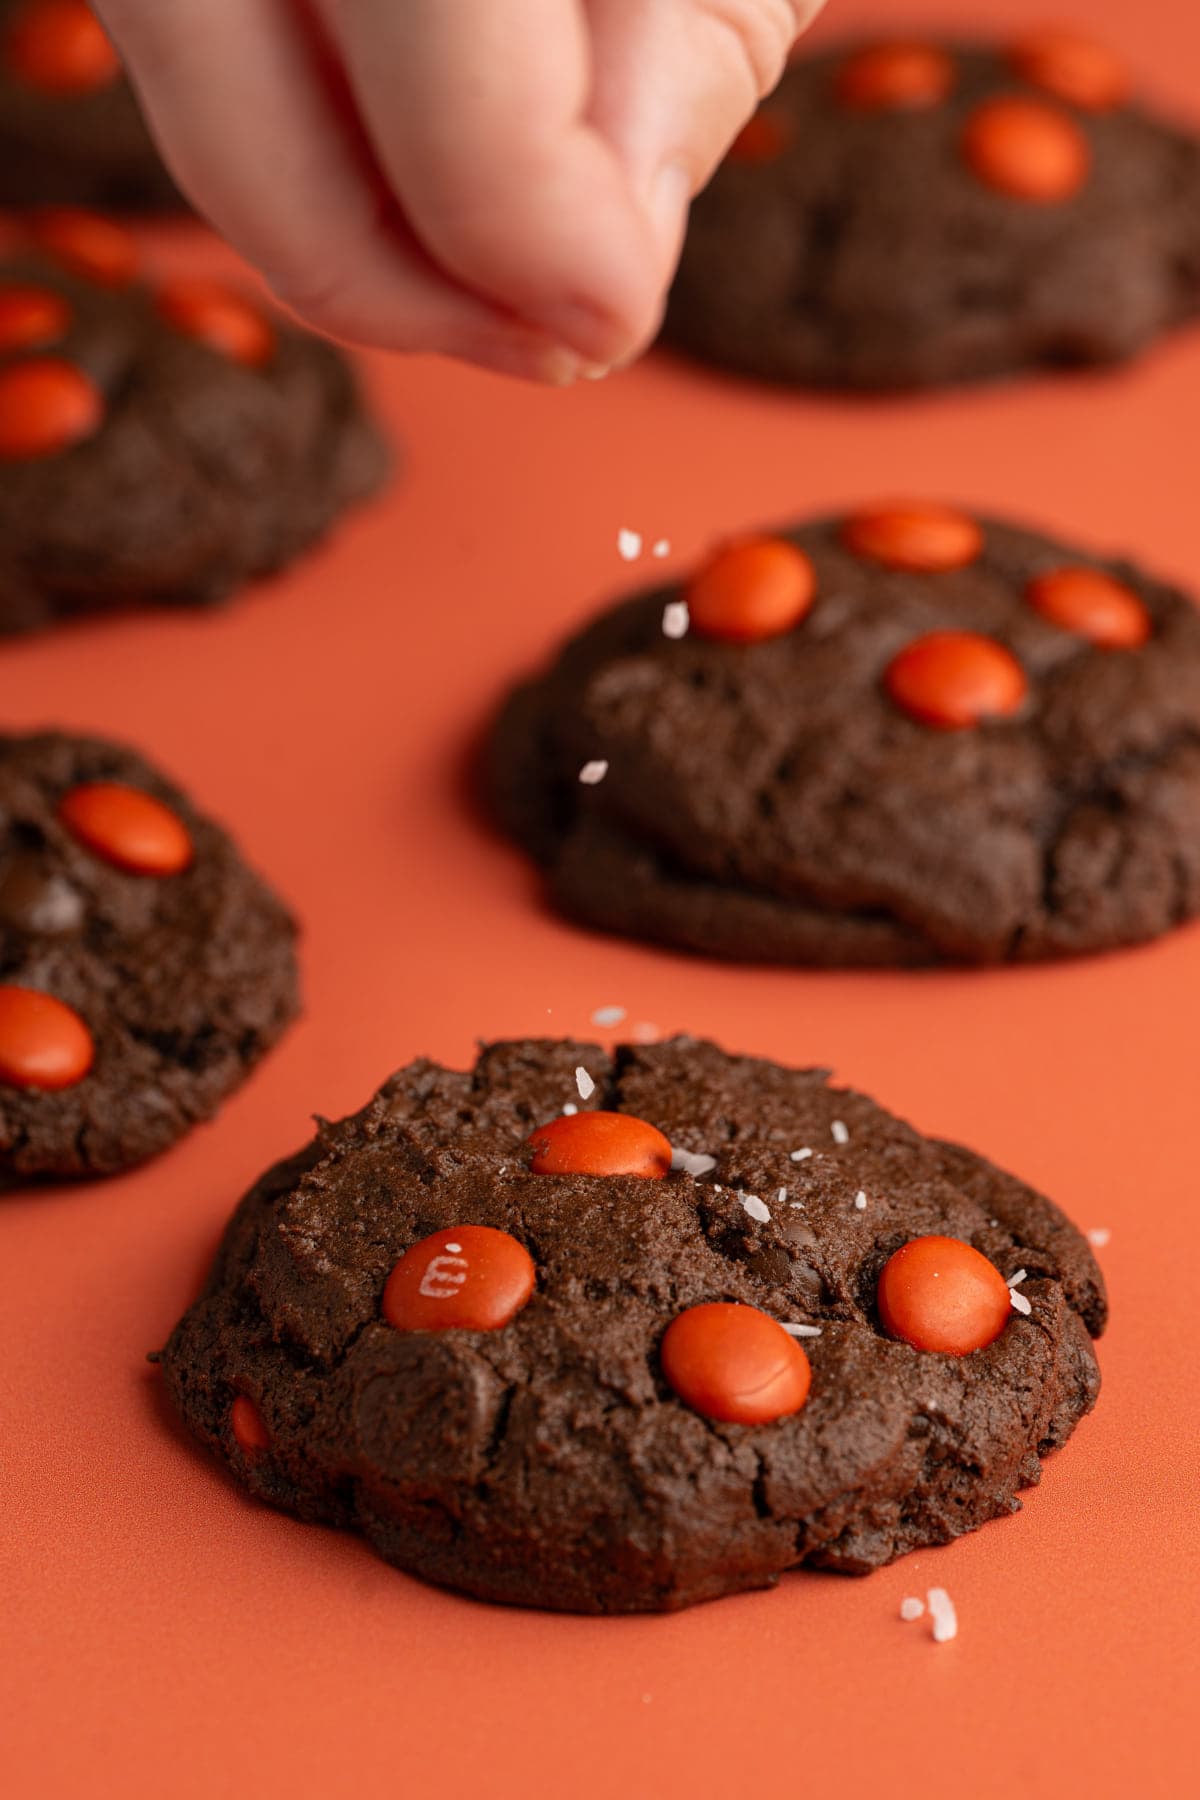 Adding flaky sea salt to double chocolate cookies with M&M's